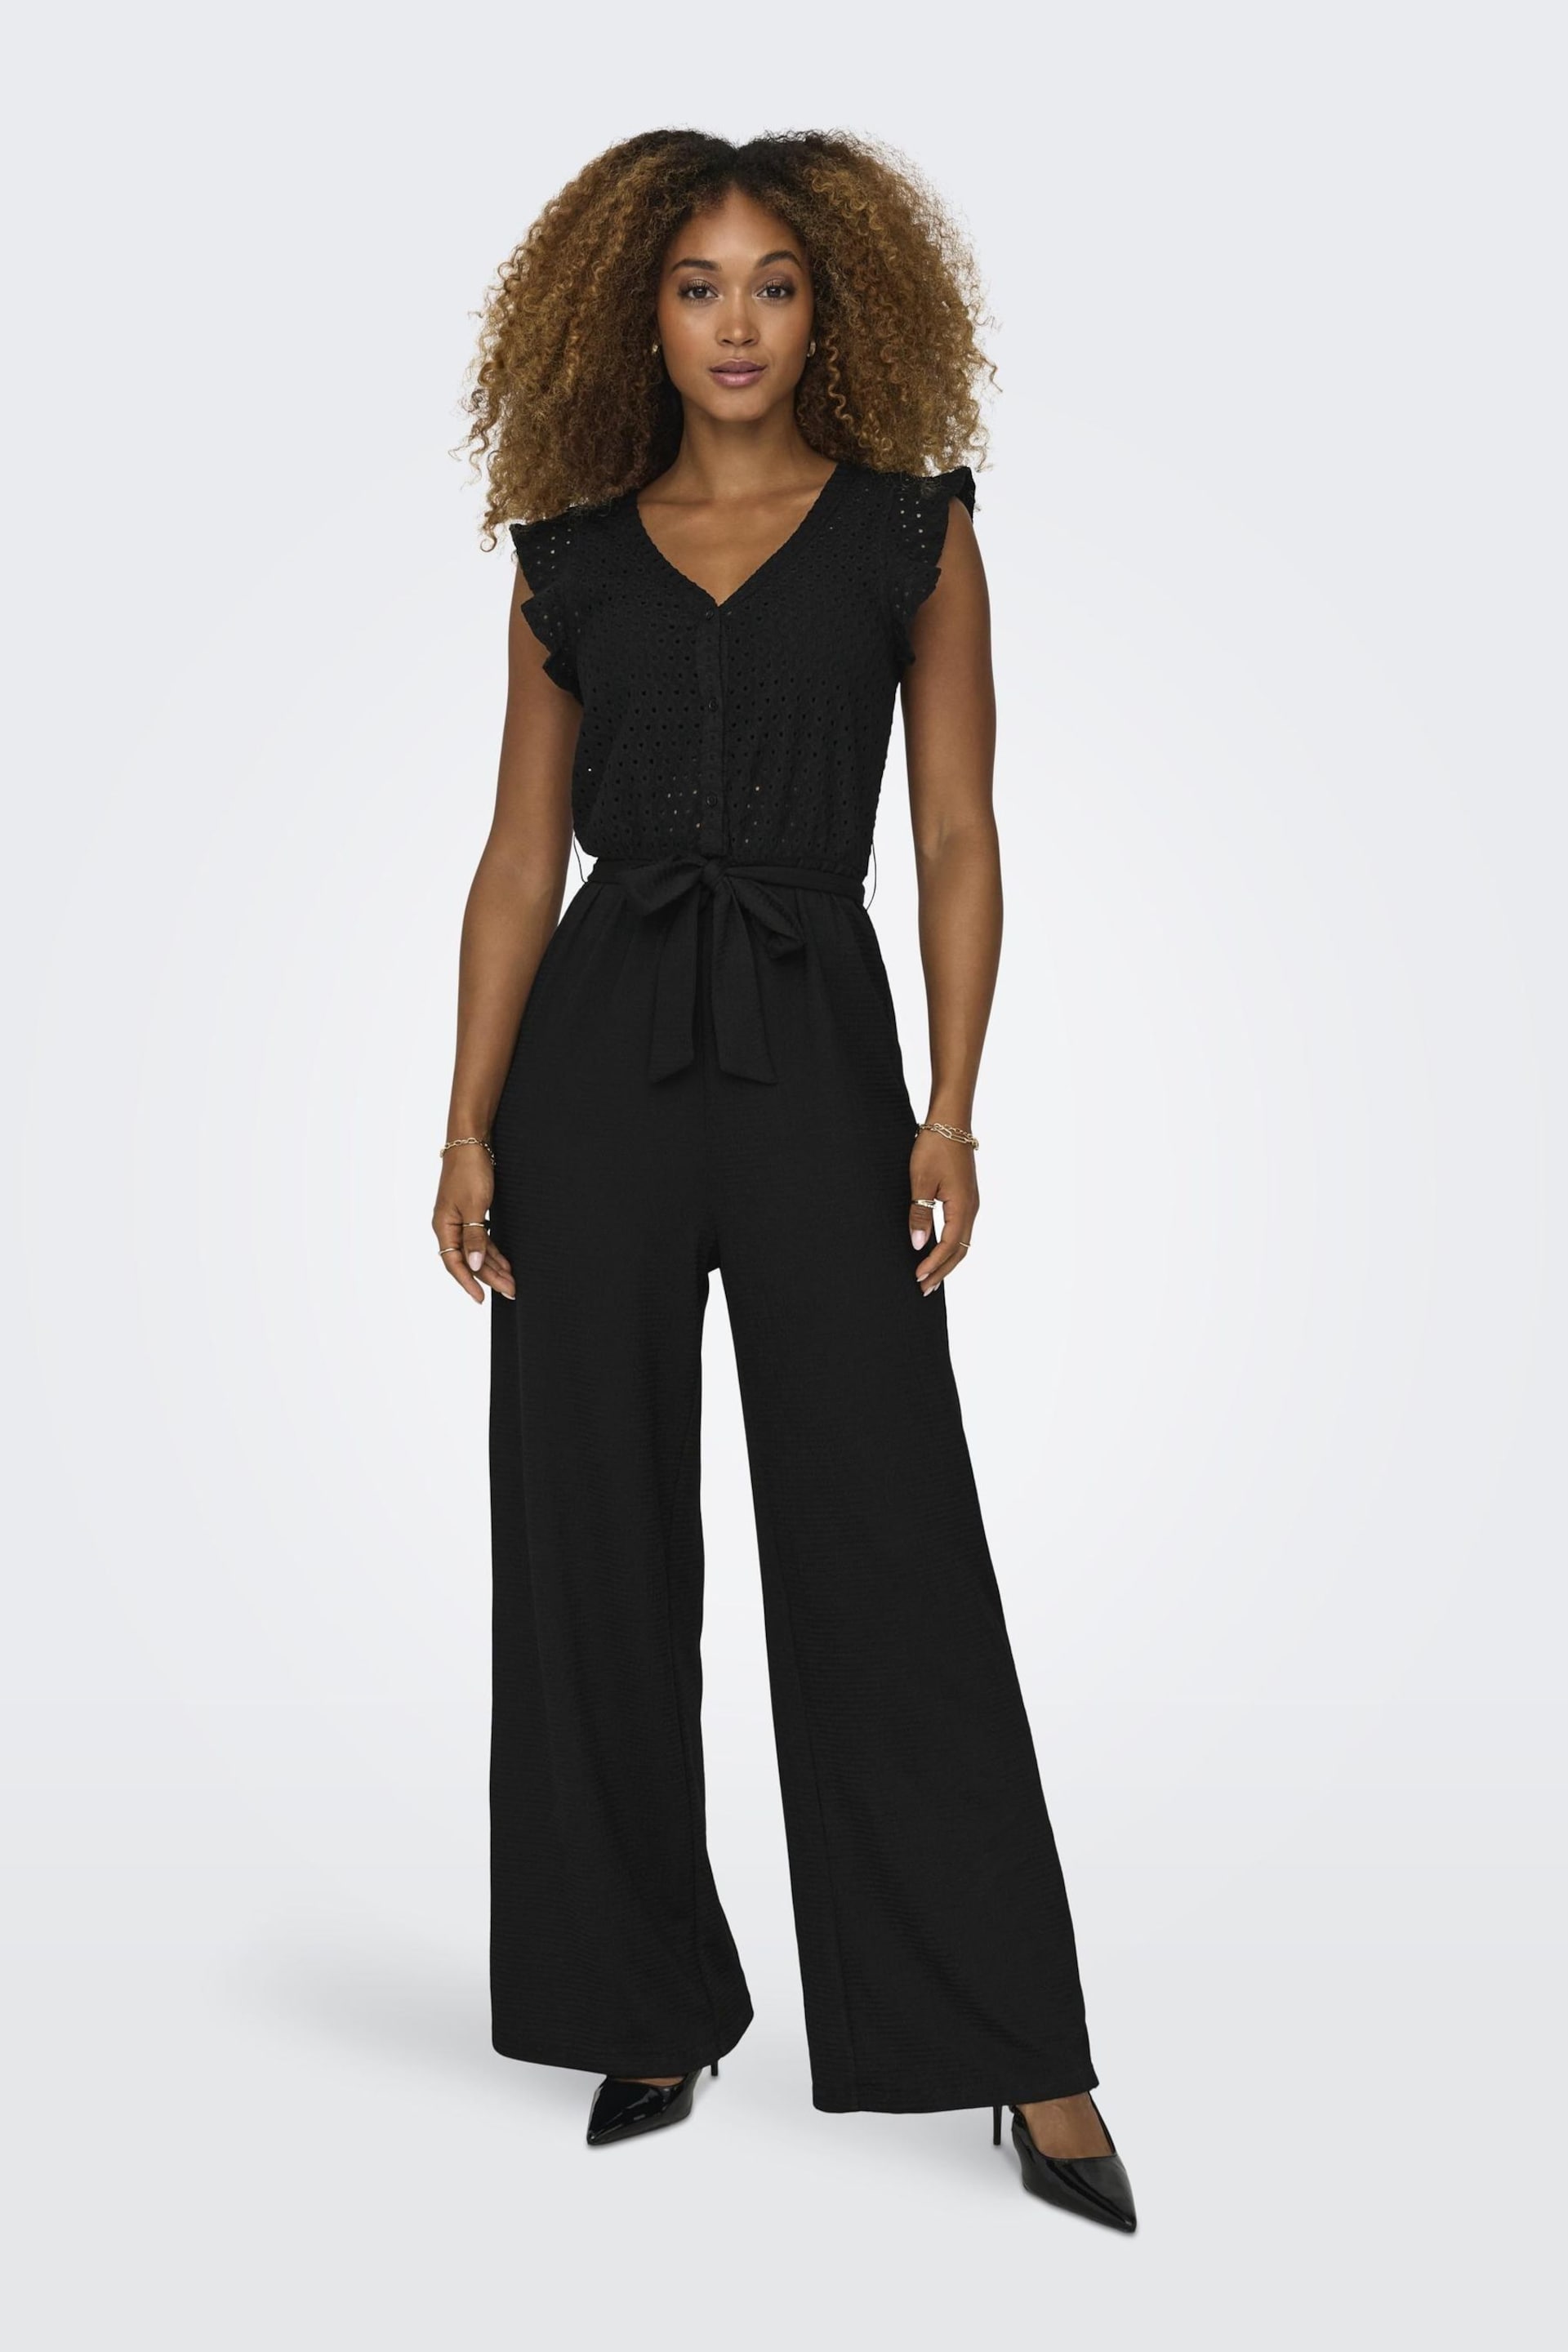 ONLY Black Broderie Top Frill Slevee Wide Leg Jumpsuit - Image 1 of 6